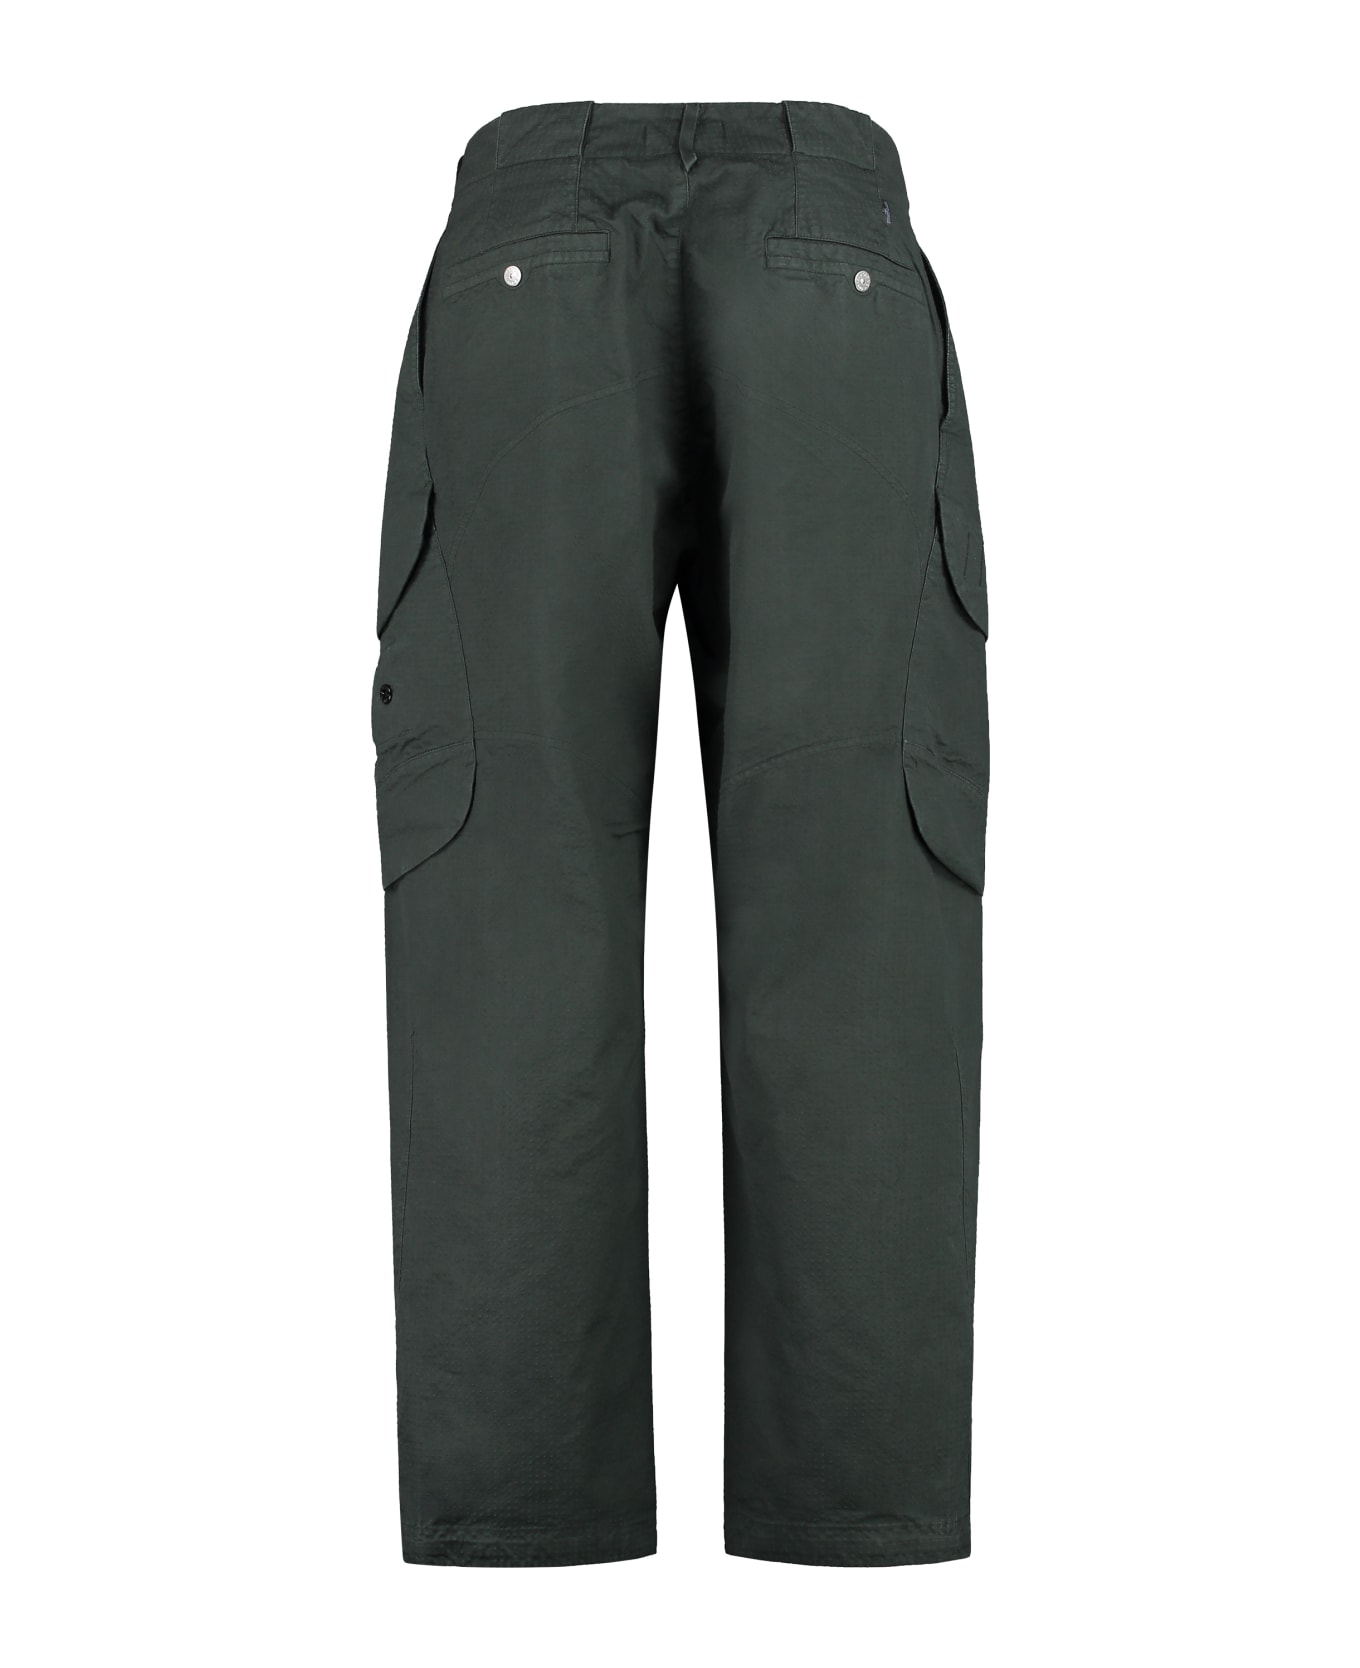 Stone Island Shadow Project Multi-pocket Cotton Trousers - green ボトムス